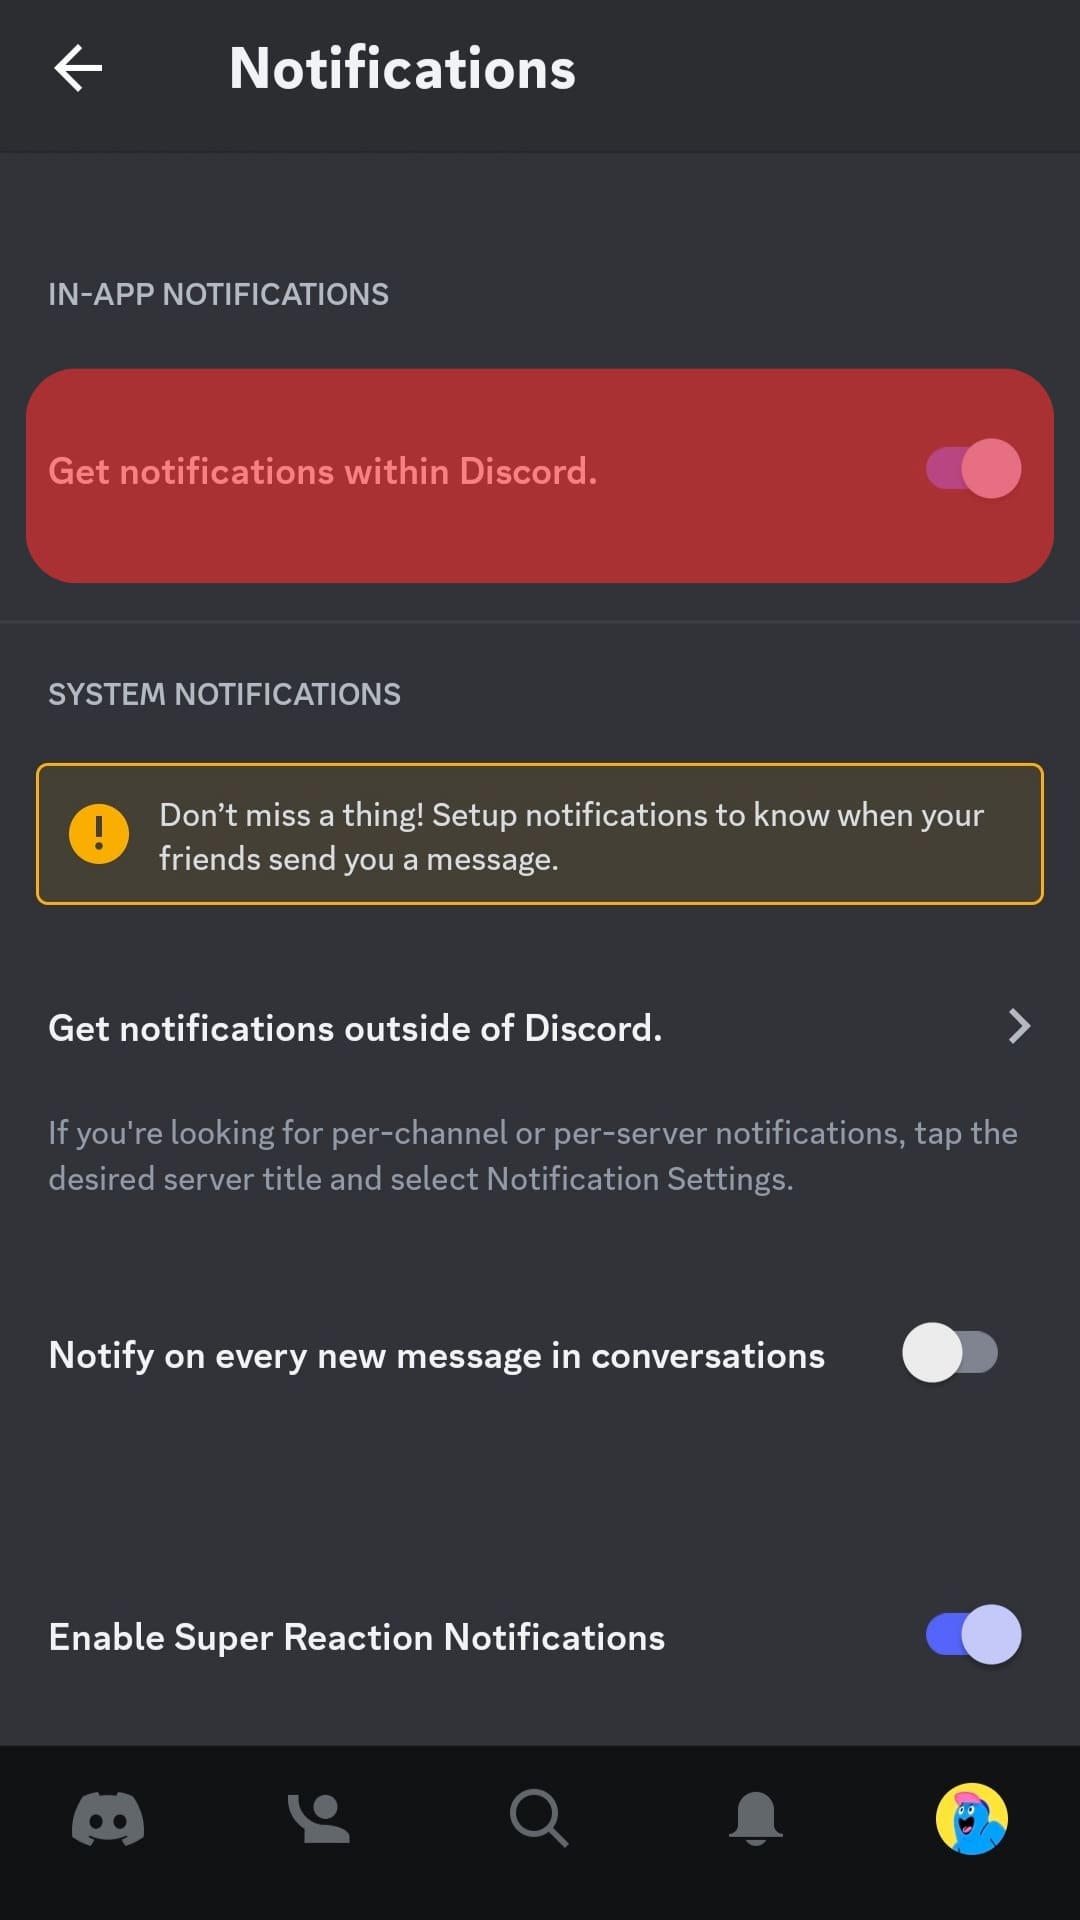 Disable Get Notifications Within Discord